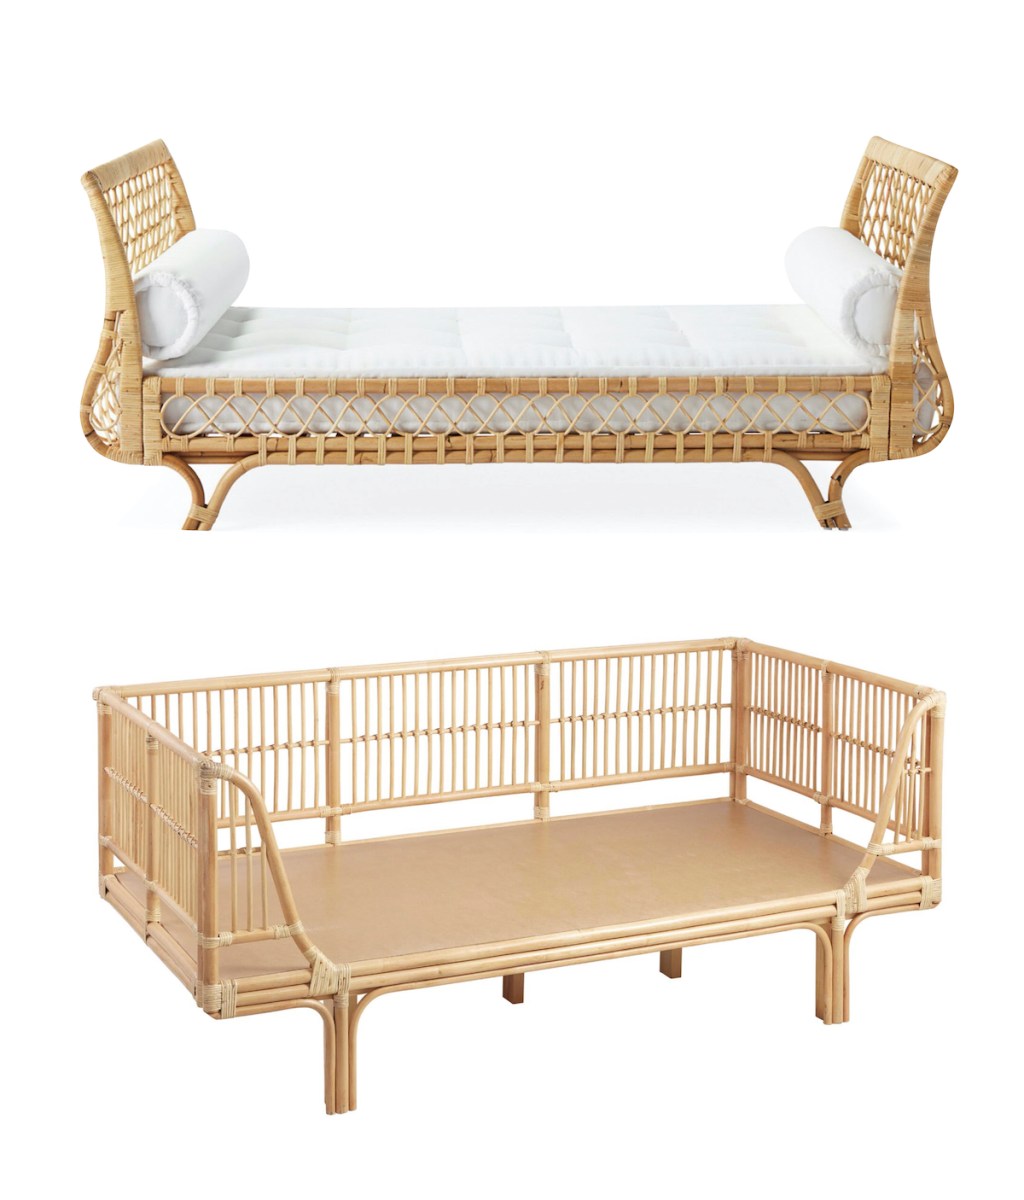 comparison of two stock photos of rattan daybeds 